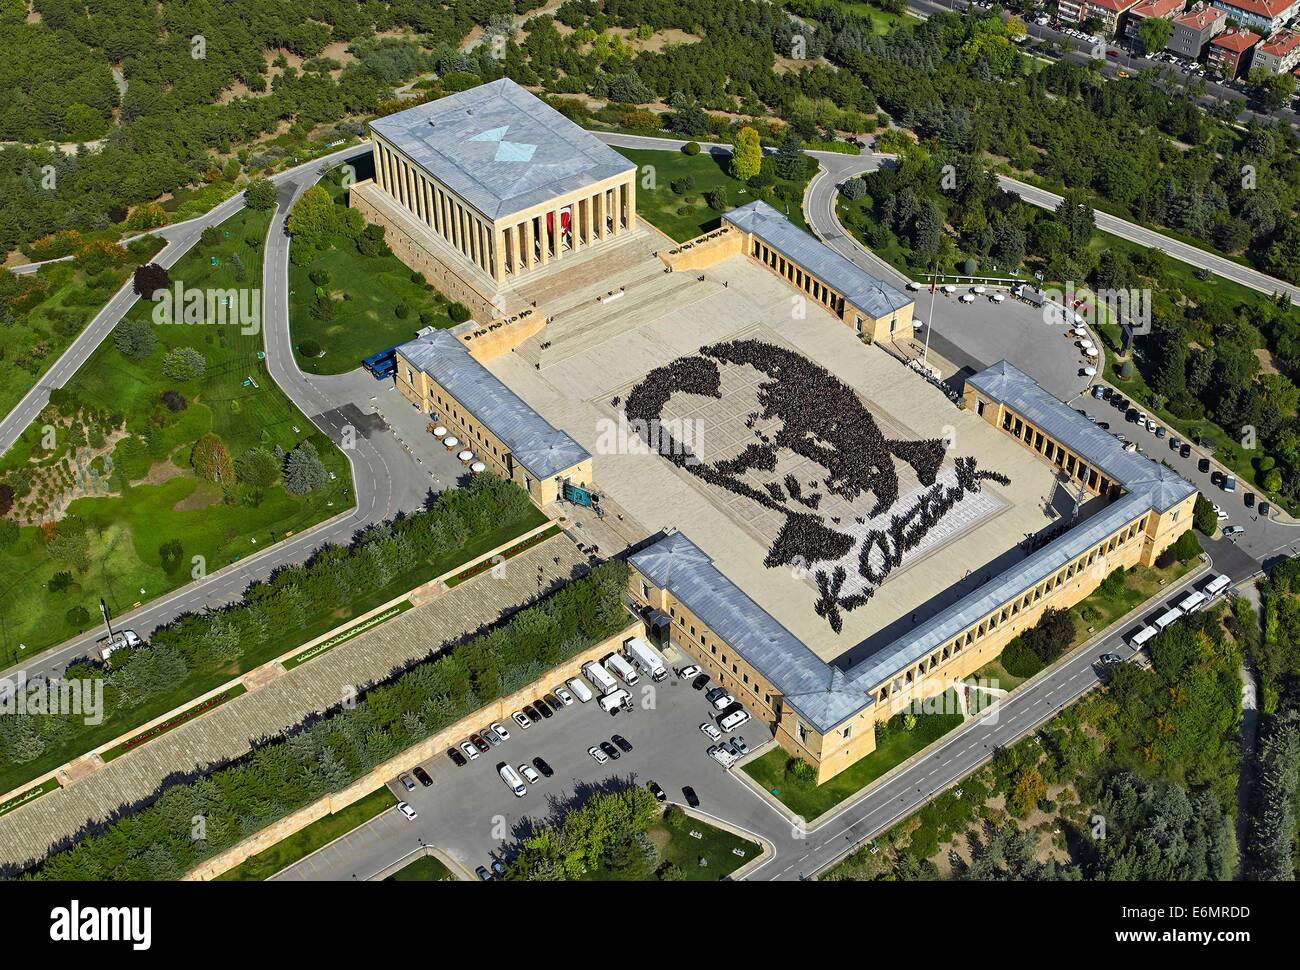 Istanbul, Republic of Turkey. 26th Aug, 2014. Six thousand volunteers gather in the mausoleum of Mustafa Kemal Ataturk, the founder of the Republic of Turkey, to form giant portrait of him to mark the Victory Day in Ankara on Aug. 26, 2014. Victory and Armed Forces Day, is a national holiday celebrating the 1922 final victory expelling all occupying forces during the Turkish war of independence. © Cihan/Xinhua/Alamy Live News Stock Photo